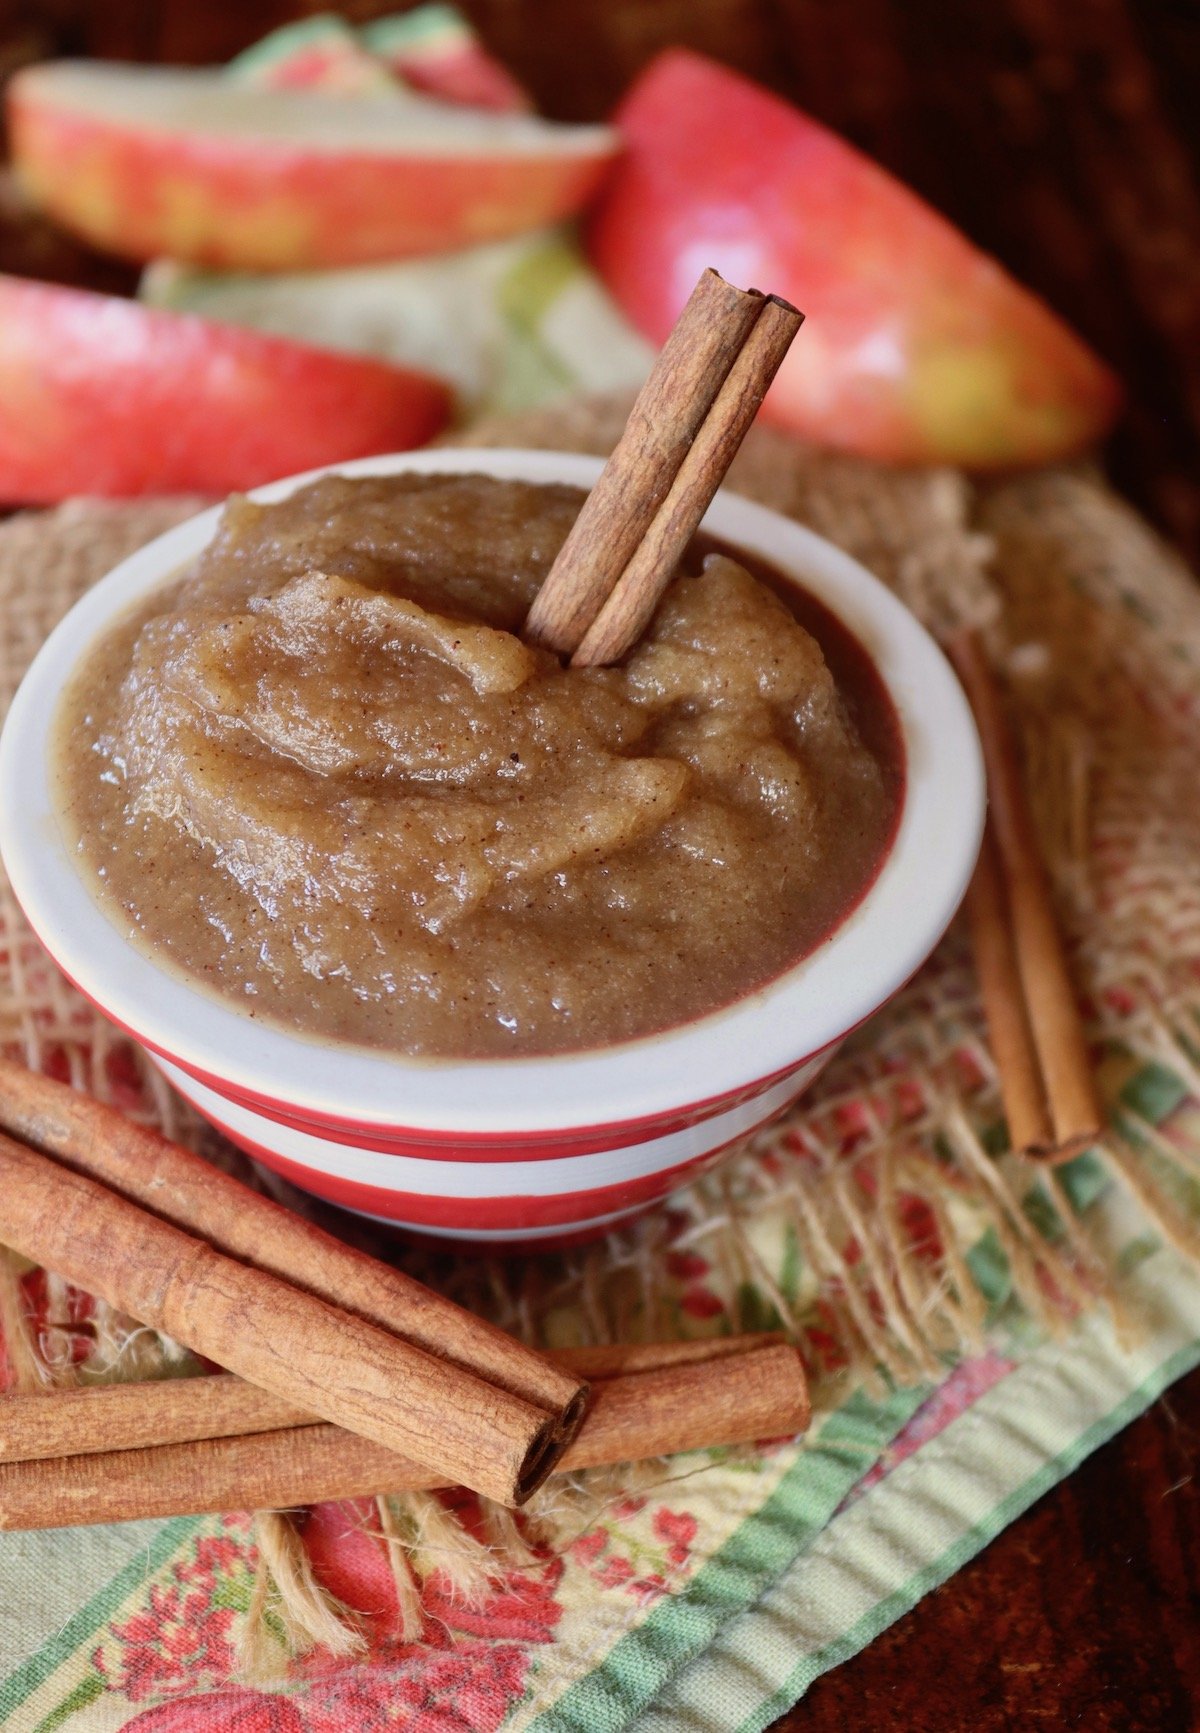 Cinnamon apple butter in a white and red striped bowl with cinnamon sticks.